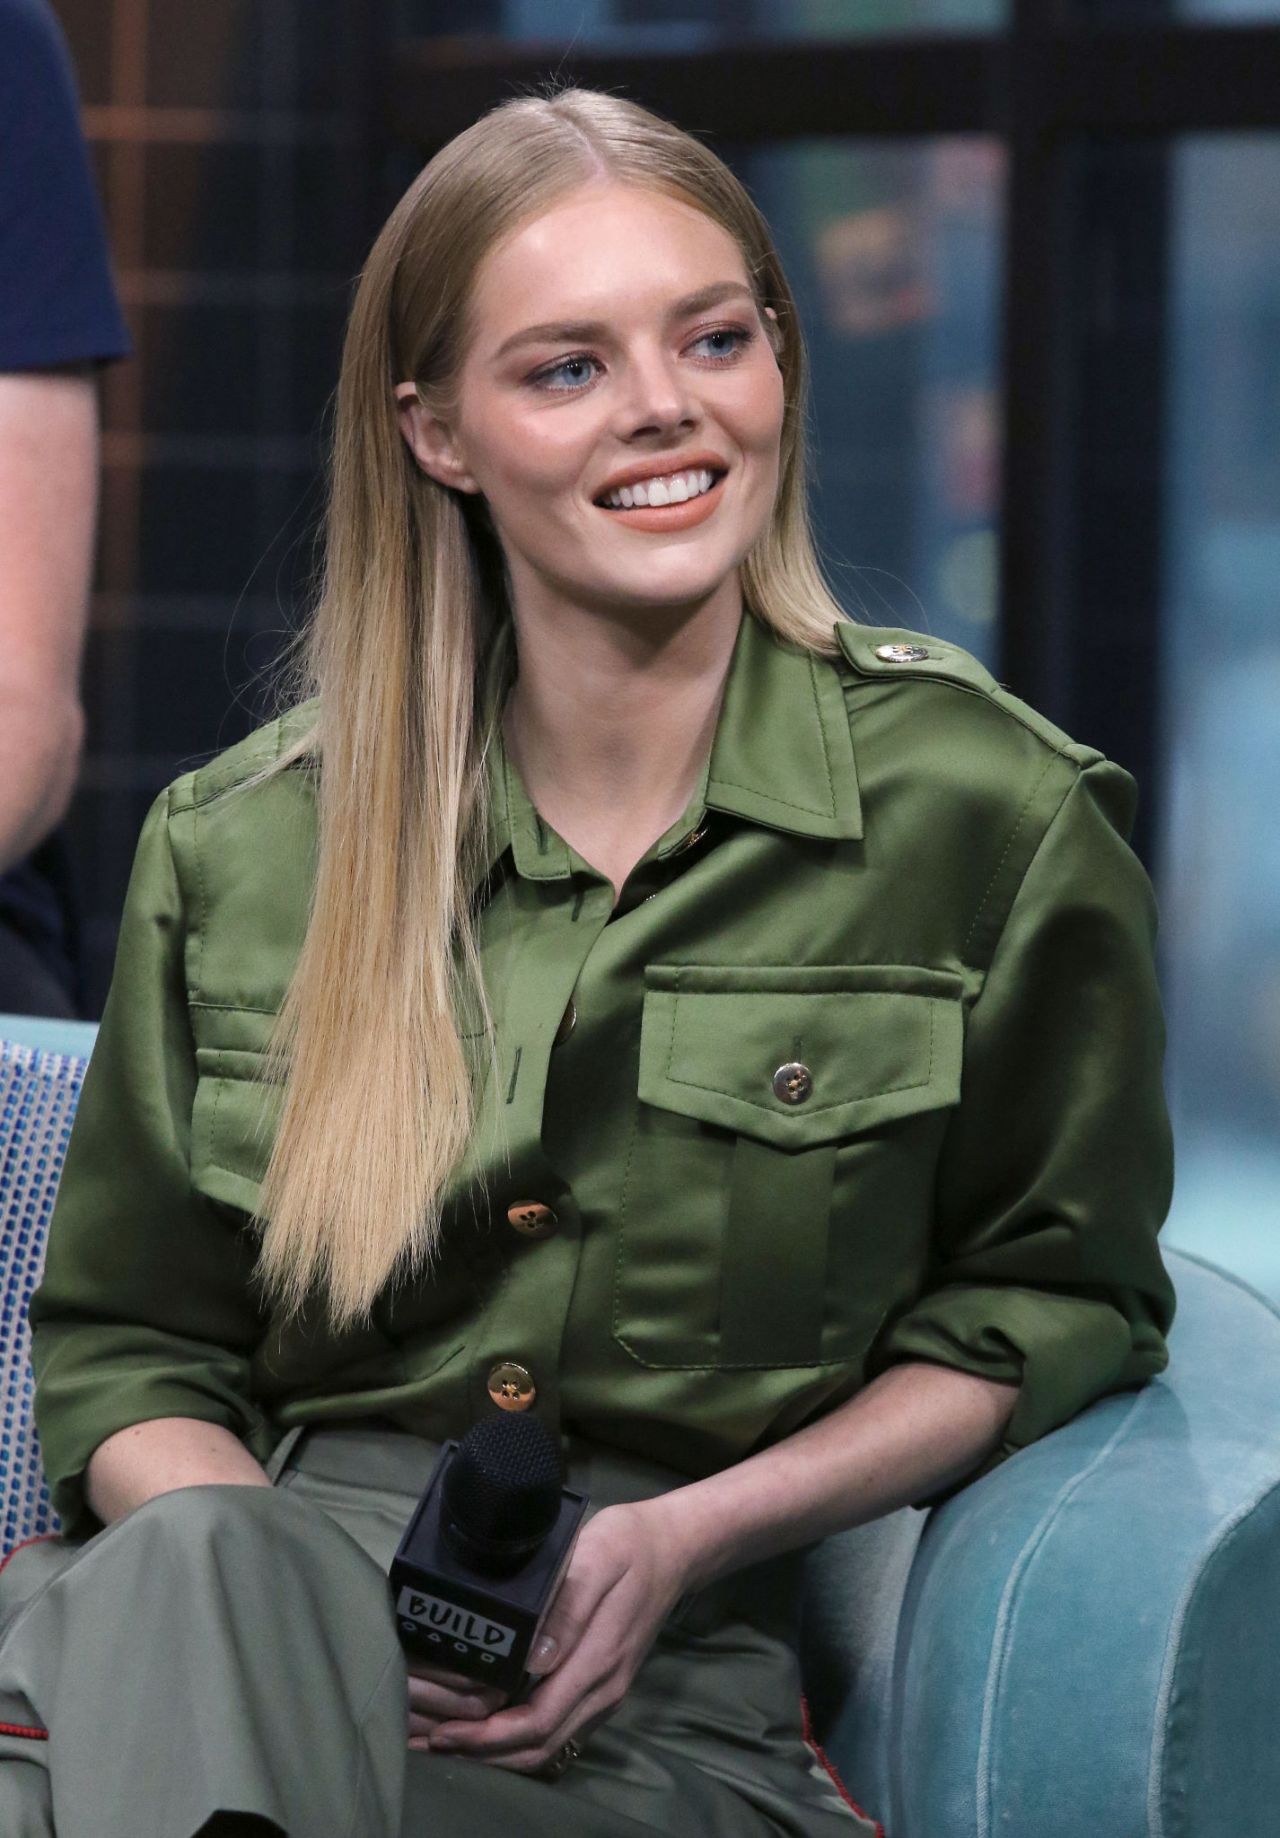 samara-weaving-discussing-ready-or-not-at-build-studio-in-nyc-08-22-2019-14.jpg